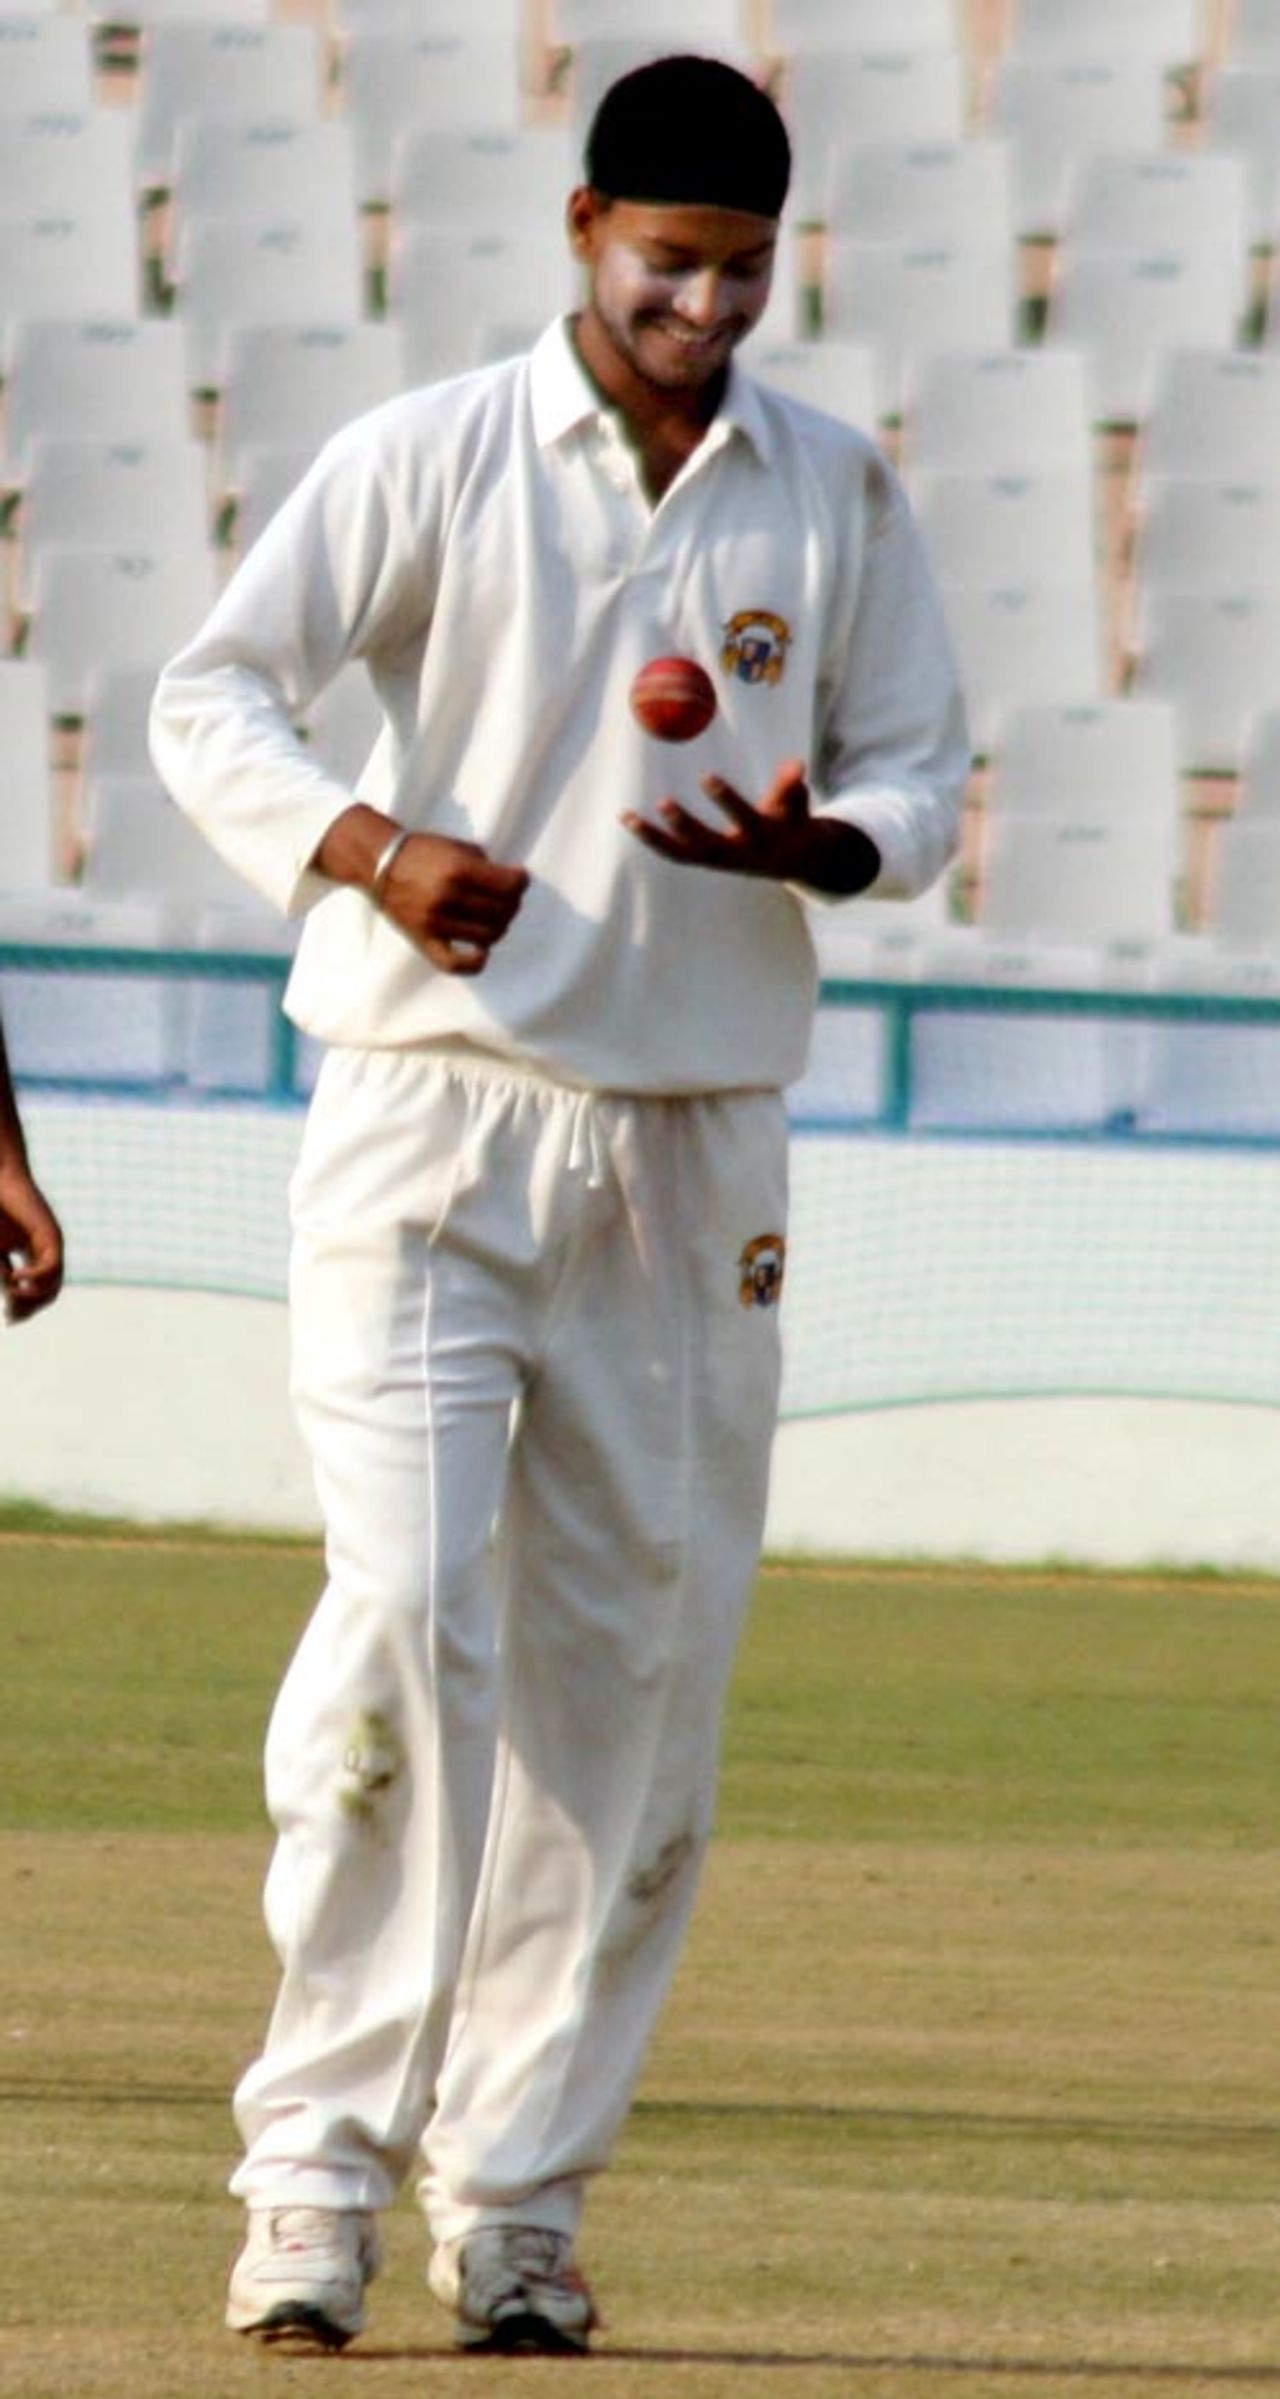 Charanjit Singh picked up the wickets of Mohammad Kaif and Suresh Raina, Ranji Trophy Super League, Group B, 3rd round, 4th day, Mohali, November 26, 2007